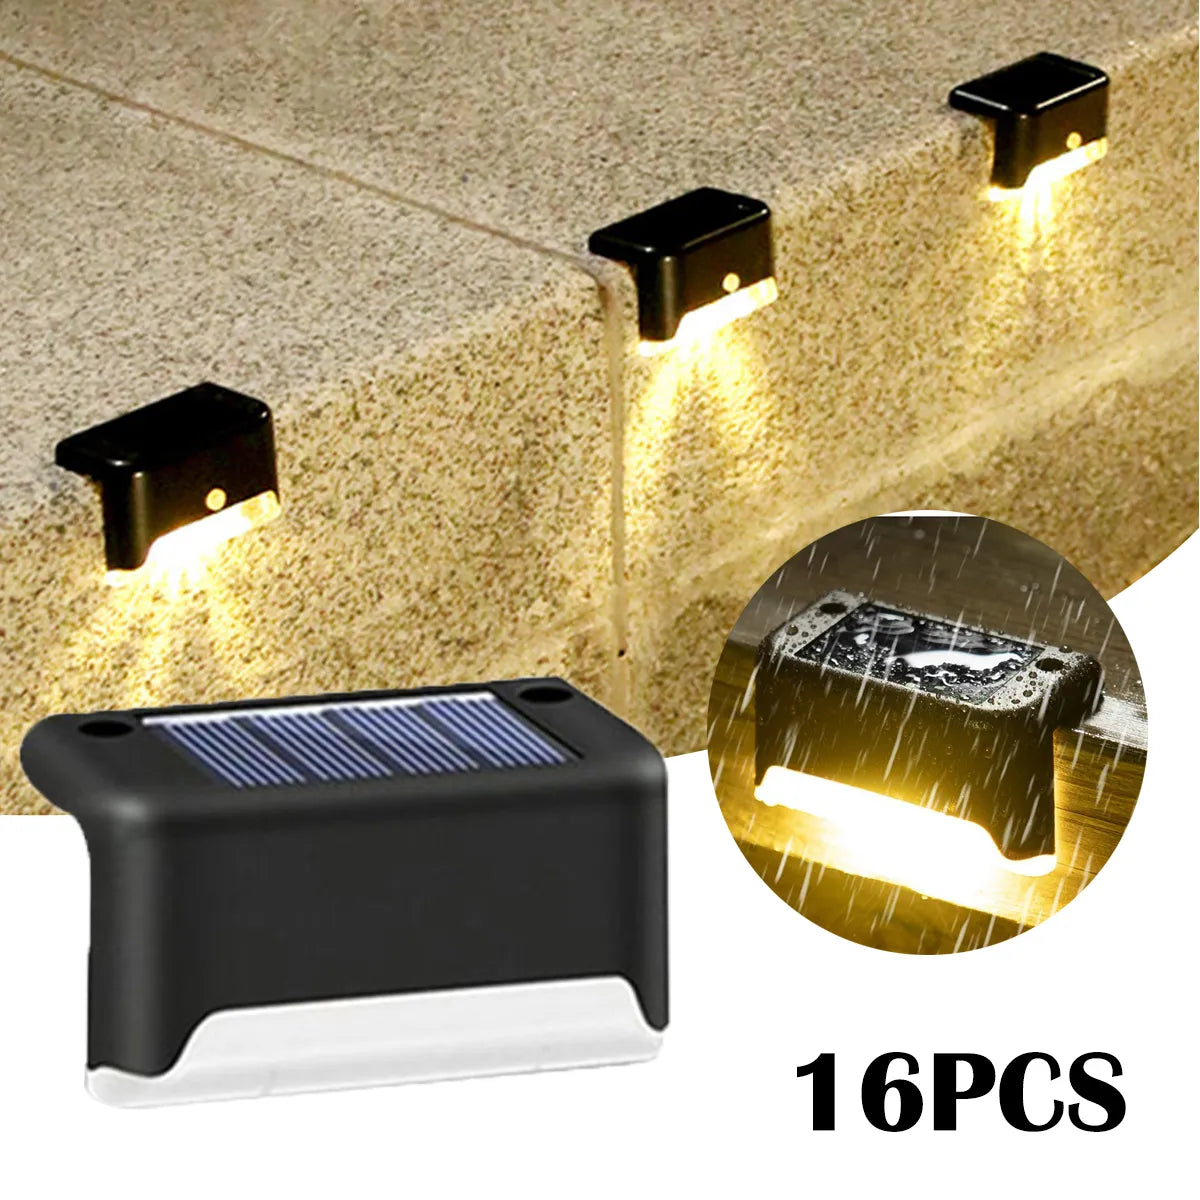 Warm White LED Solar Step Lamp for Path and Stair